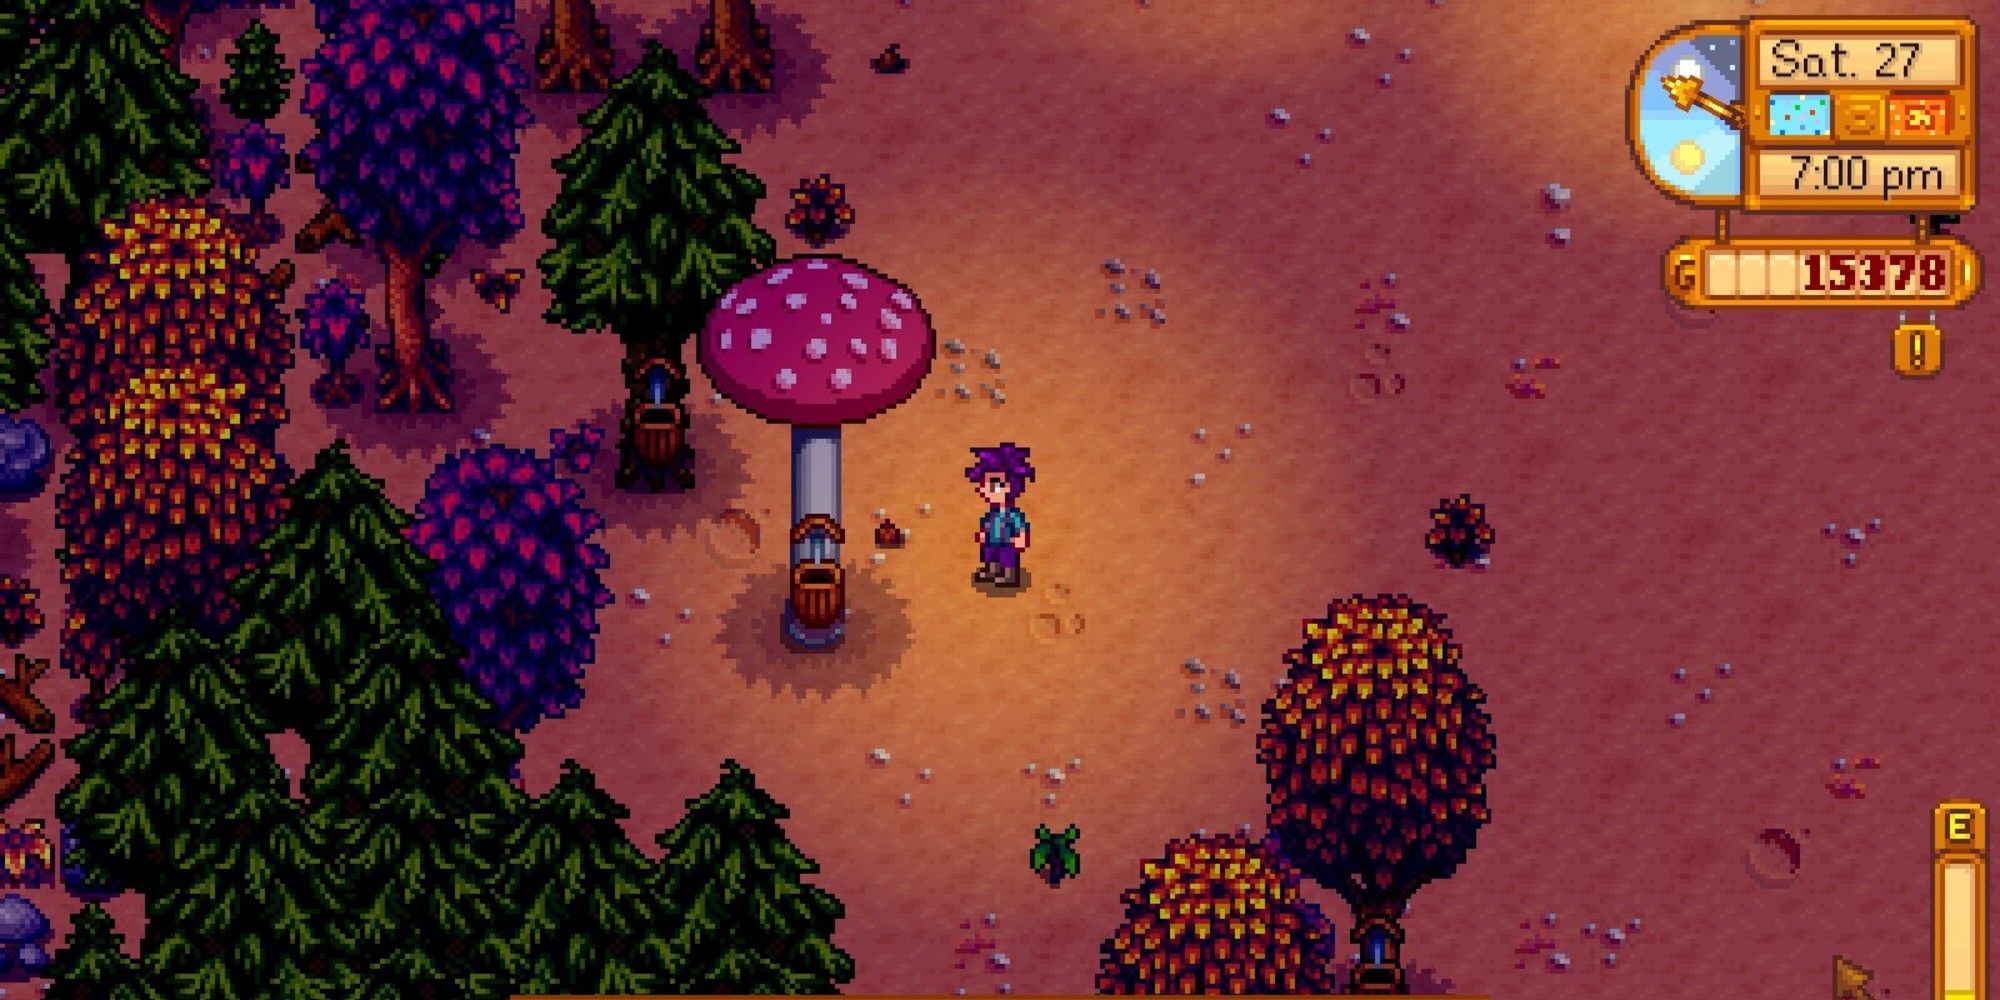 tapper placed on giant mushroom with player standing nearby